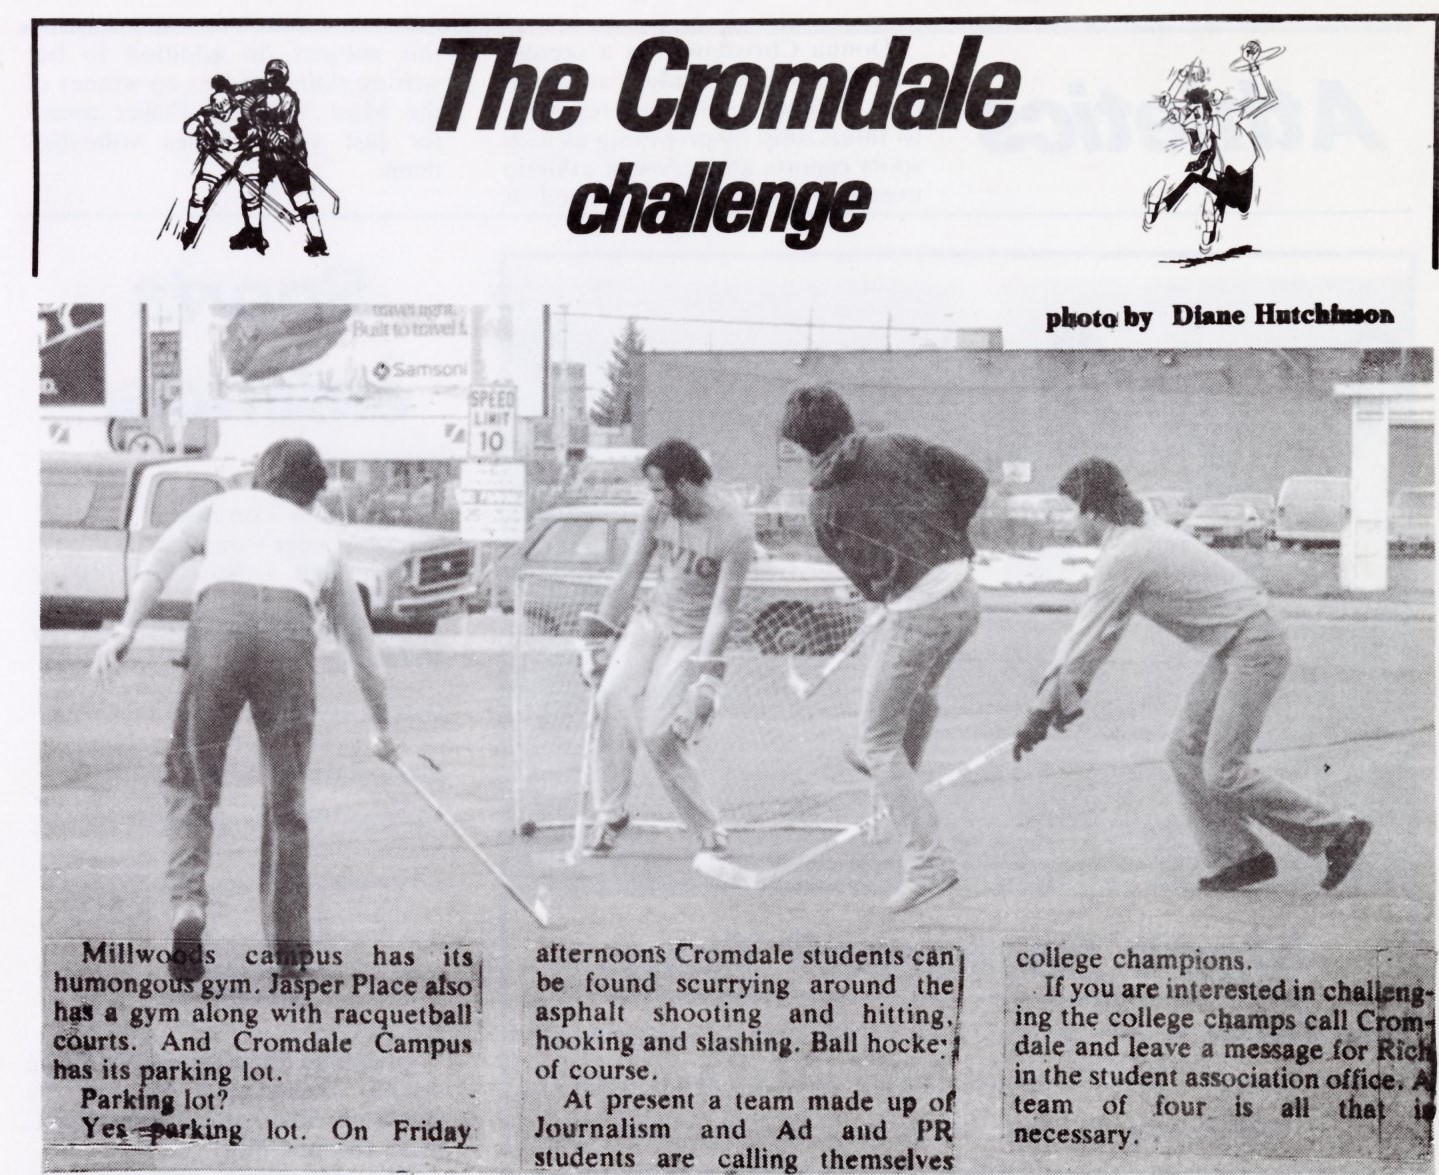 Old photograph of students playing hockey in the Cromdale campus parking lot. Article text is included in the description below.